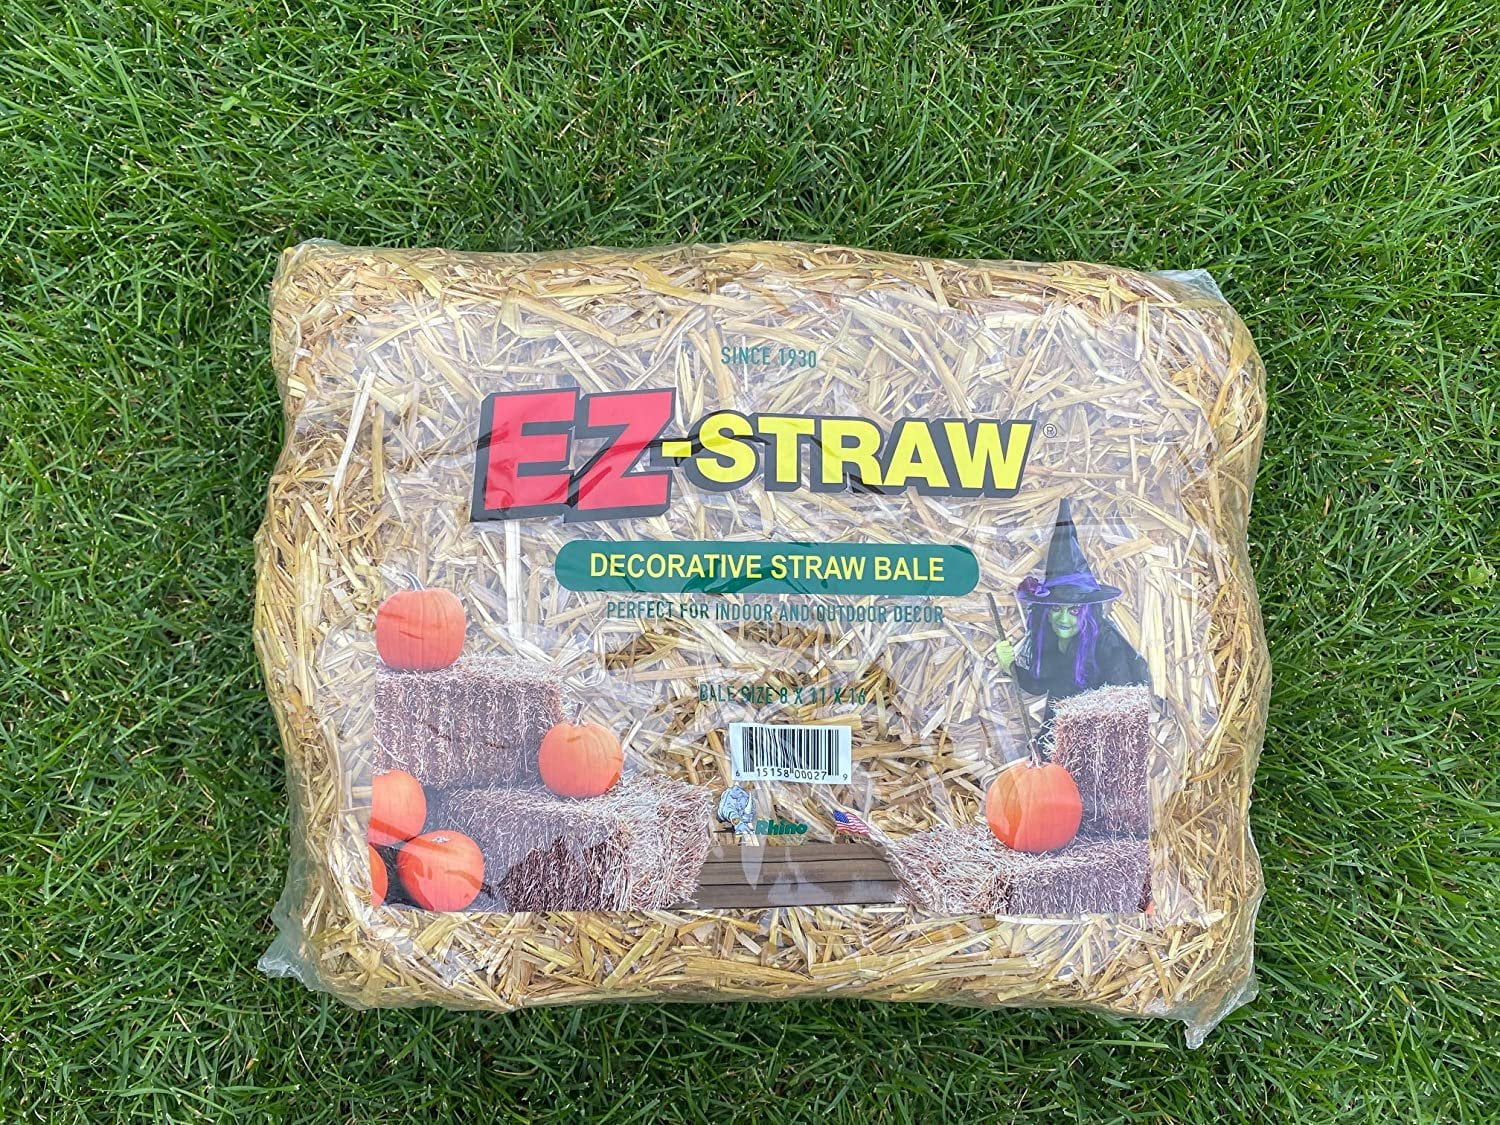 Full Pack Multi Purpose 1 cubic foot EZ-Straw Just Straw Clean Processed Straw Small Bale 